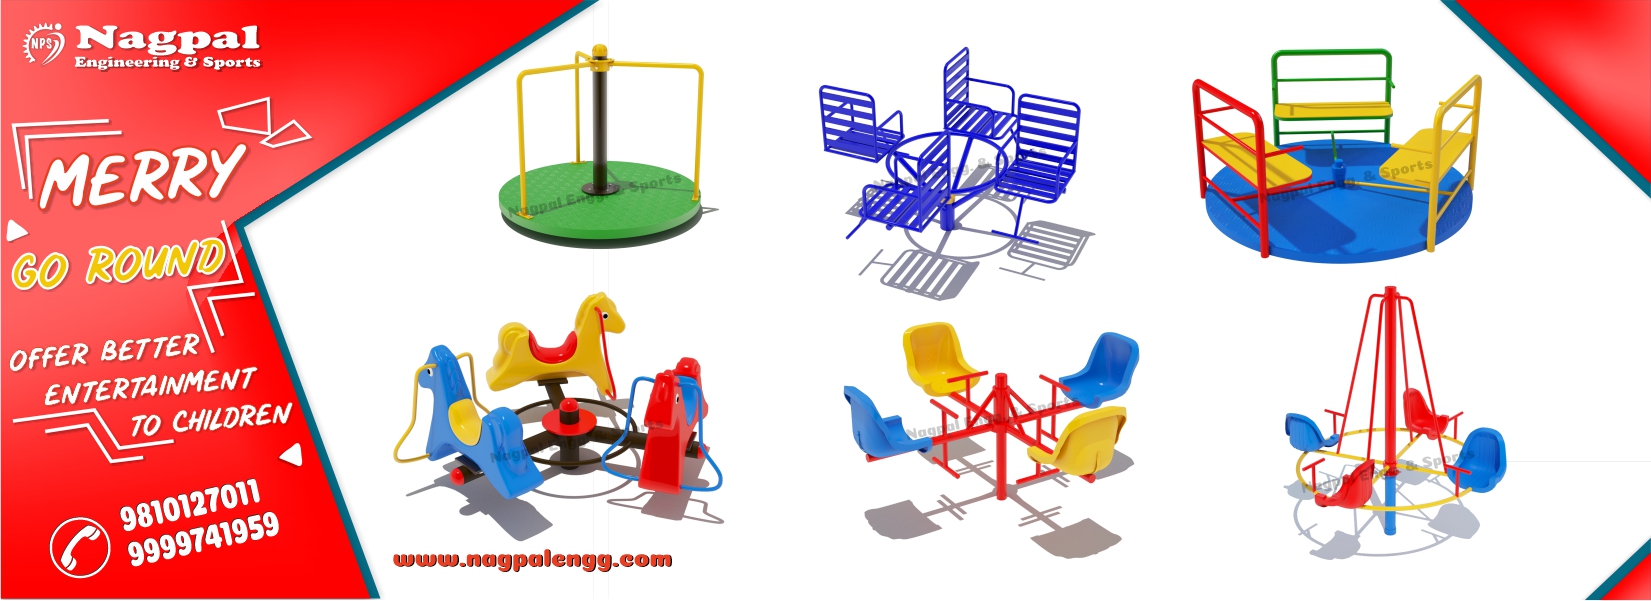 Merry Go Round Manufacturers in Rohtak